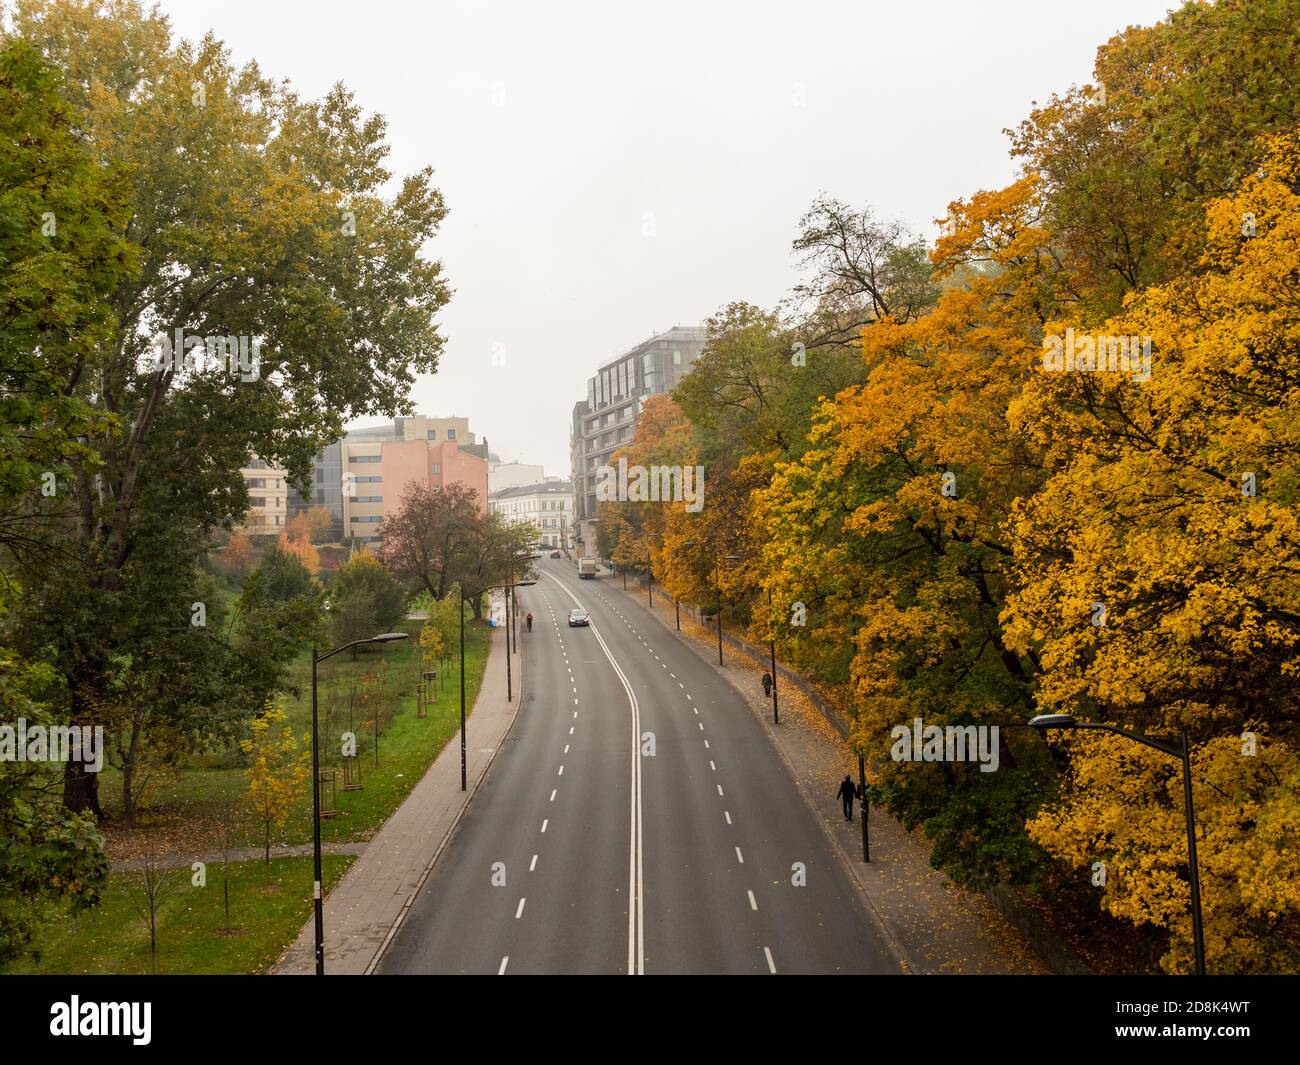 Warsaw/Poland - 25/10/2020 - almost empty street, few cars and people. Autumn time. Stock Photo